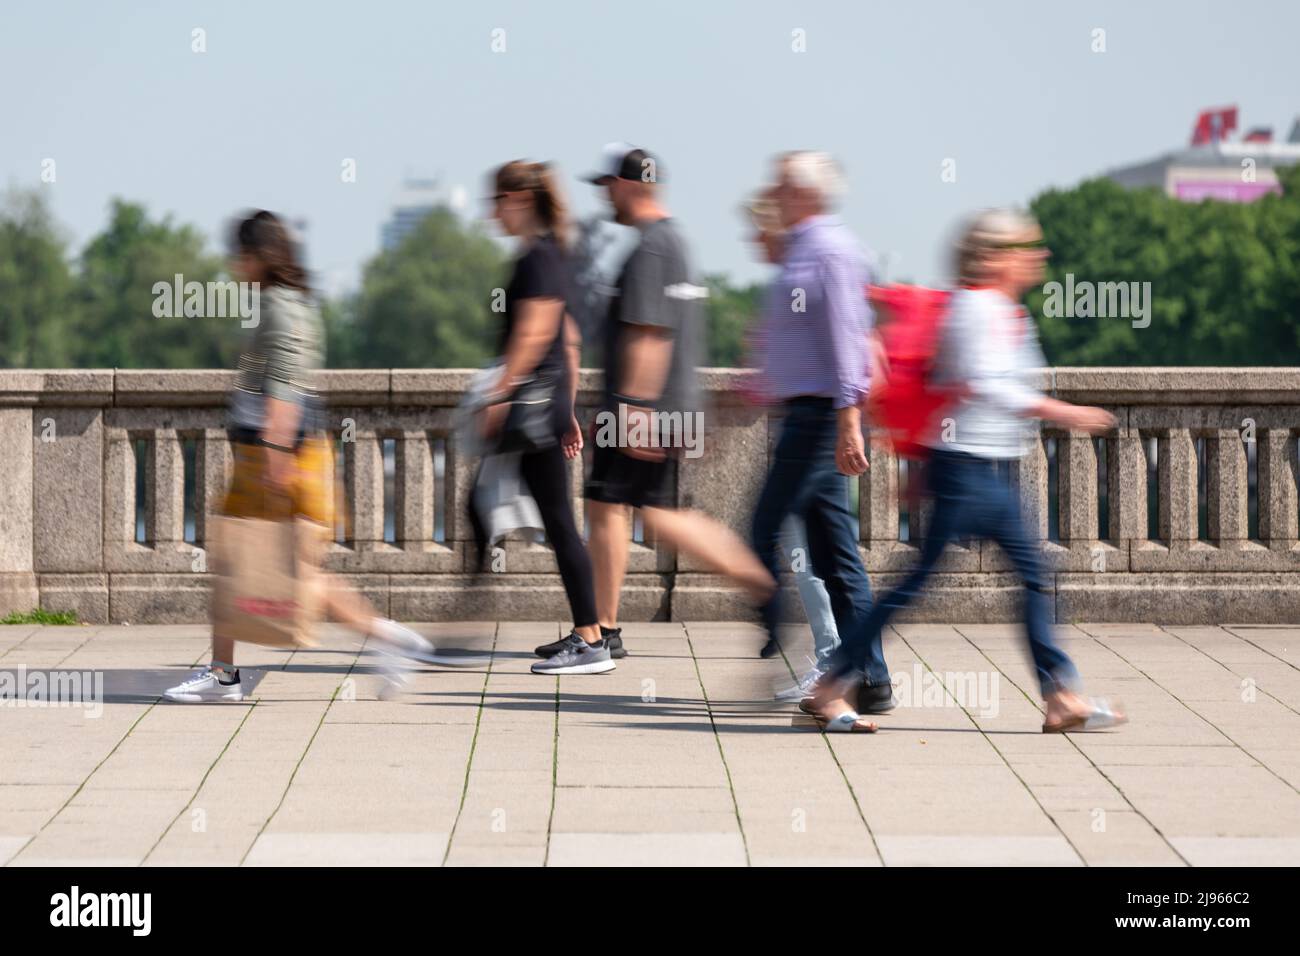 Pedestrians in motion blurred by long exposure Stock Photo